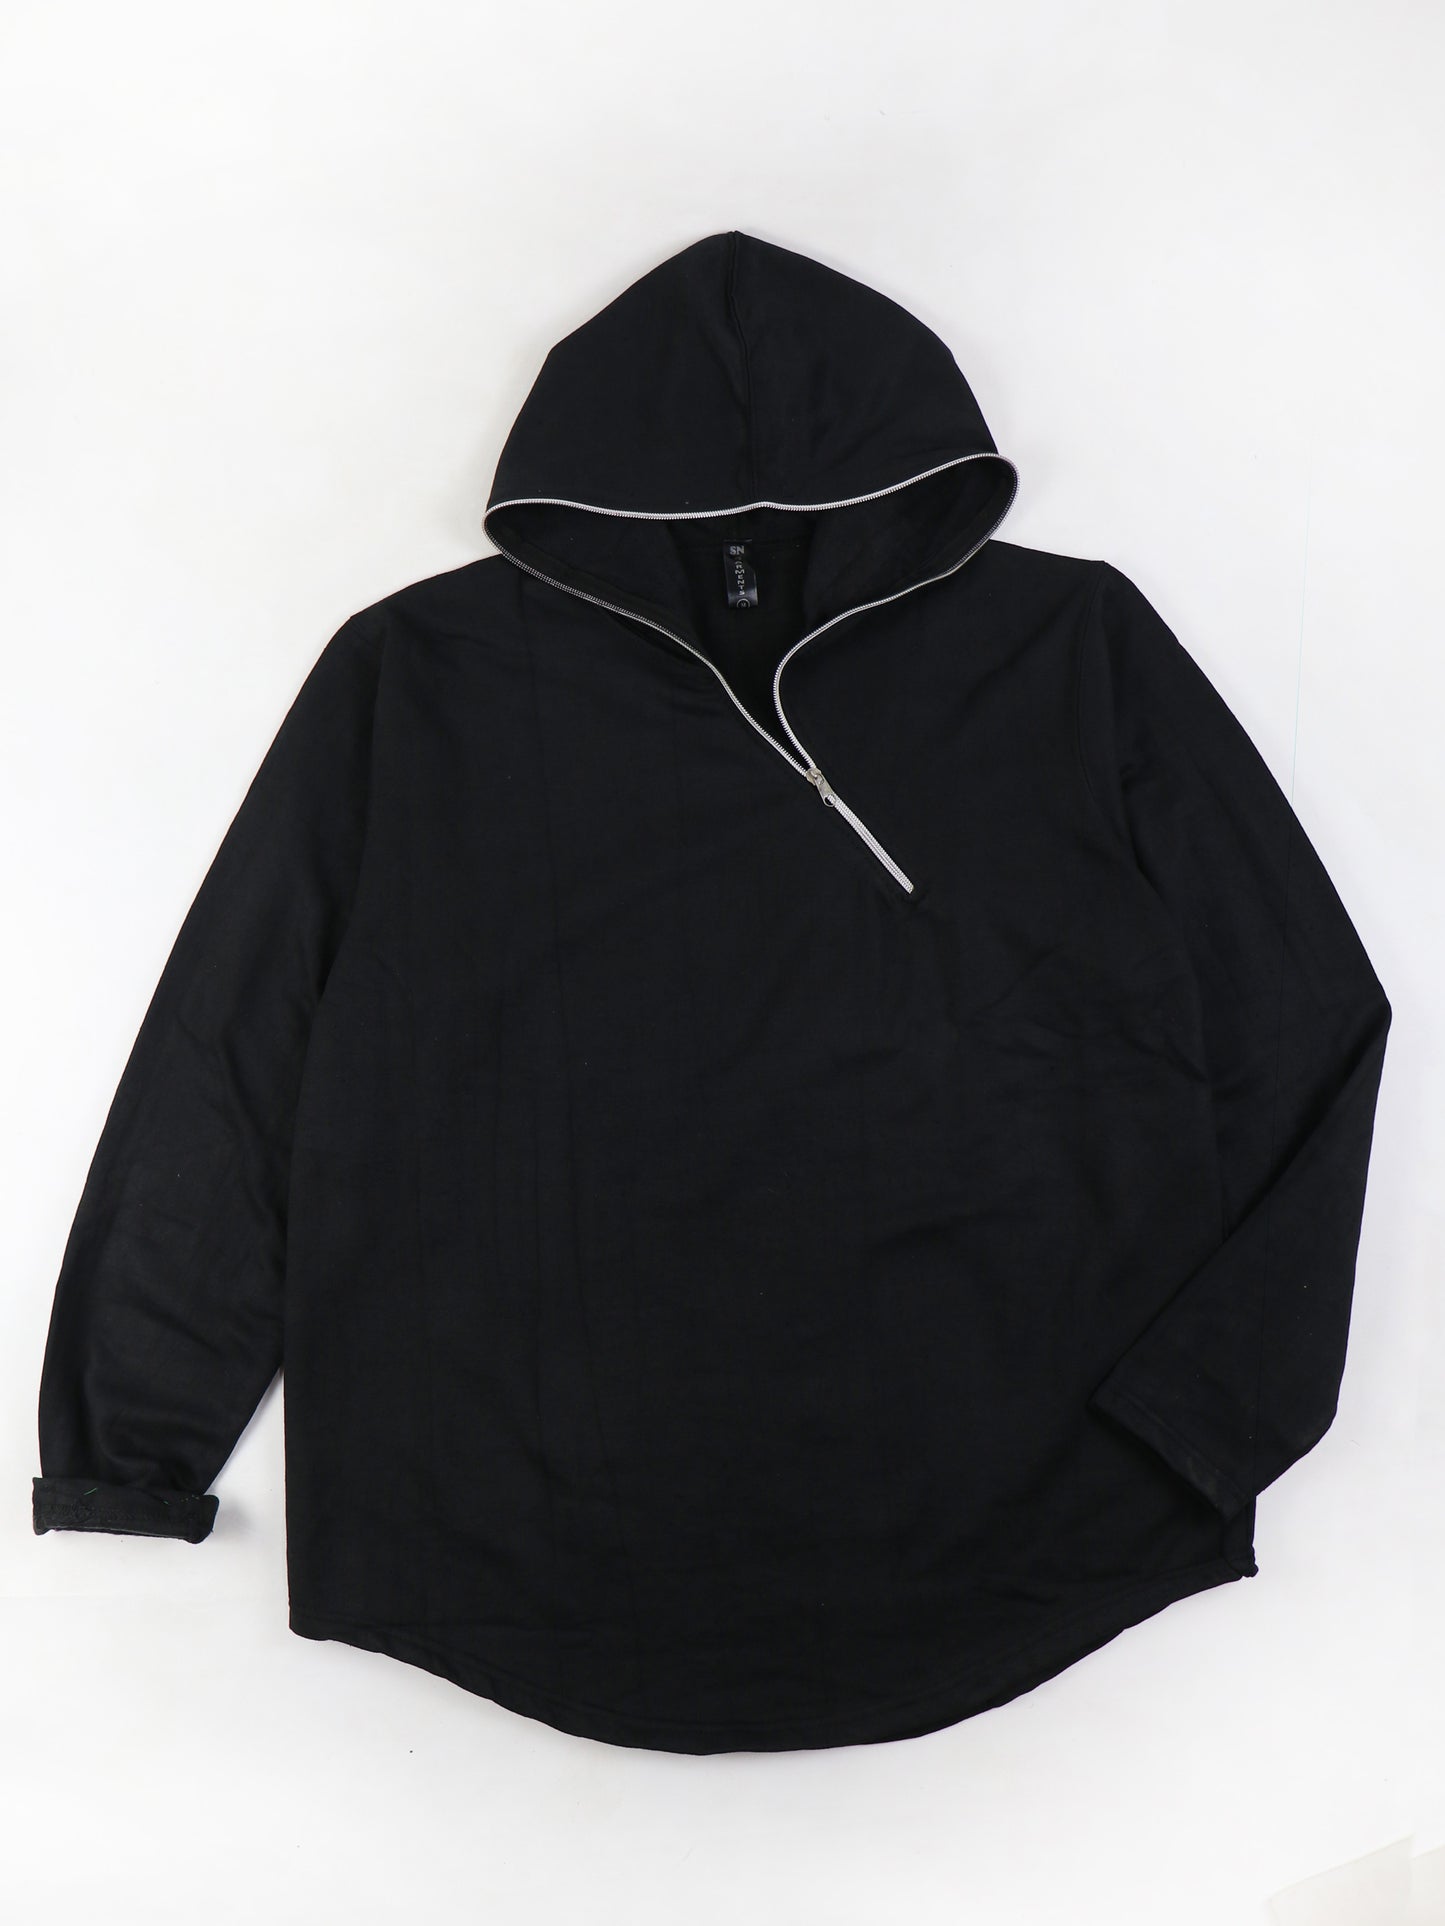 MH06 NS Unisex Pullover Hoodie Plain Black – The Cut Price